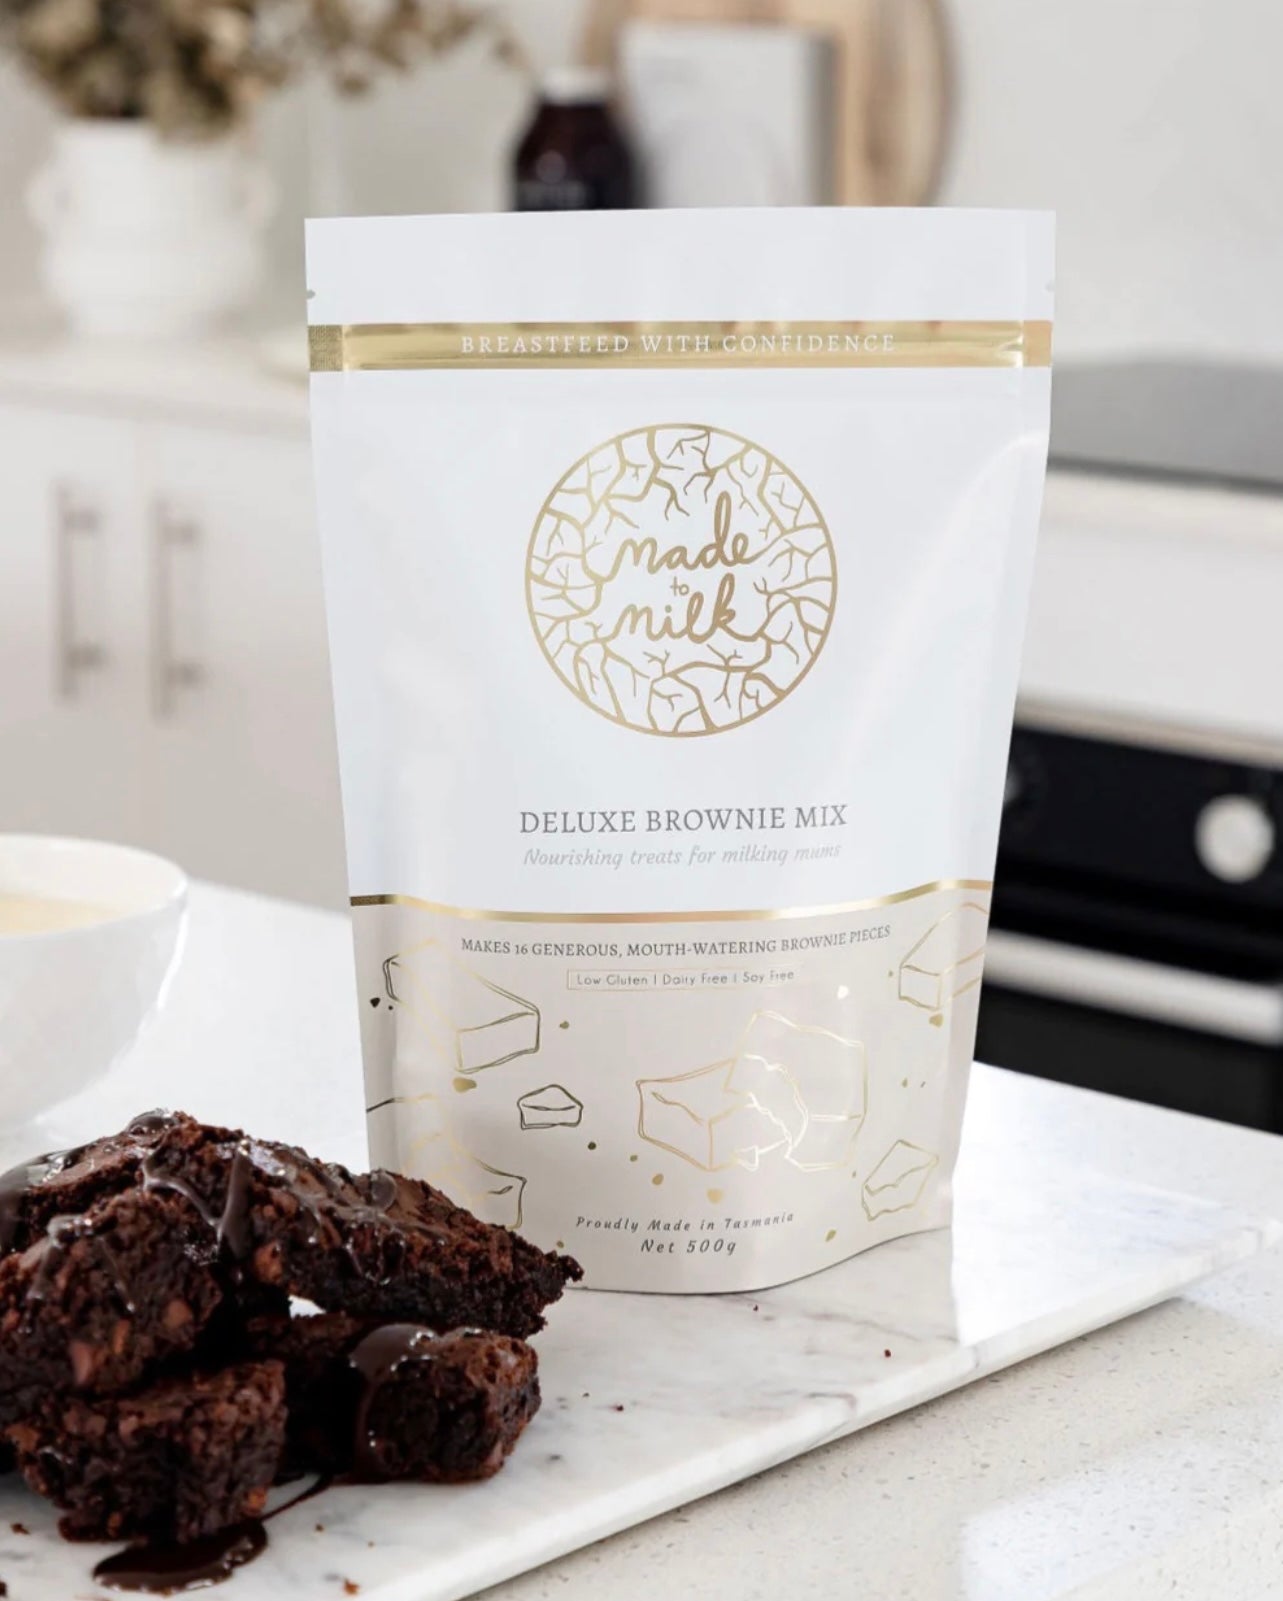 Deluxe Brownie Mix - Low Gluten/Dairy Free